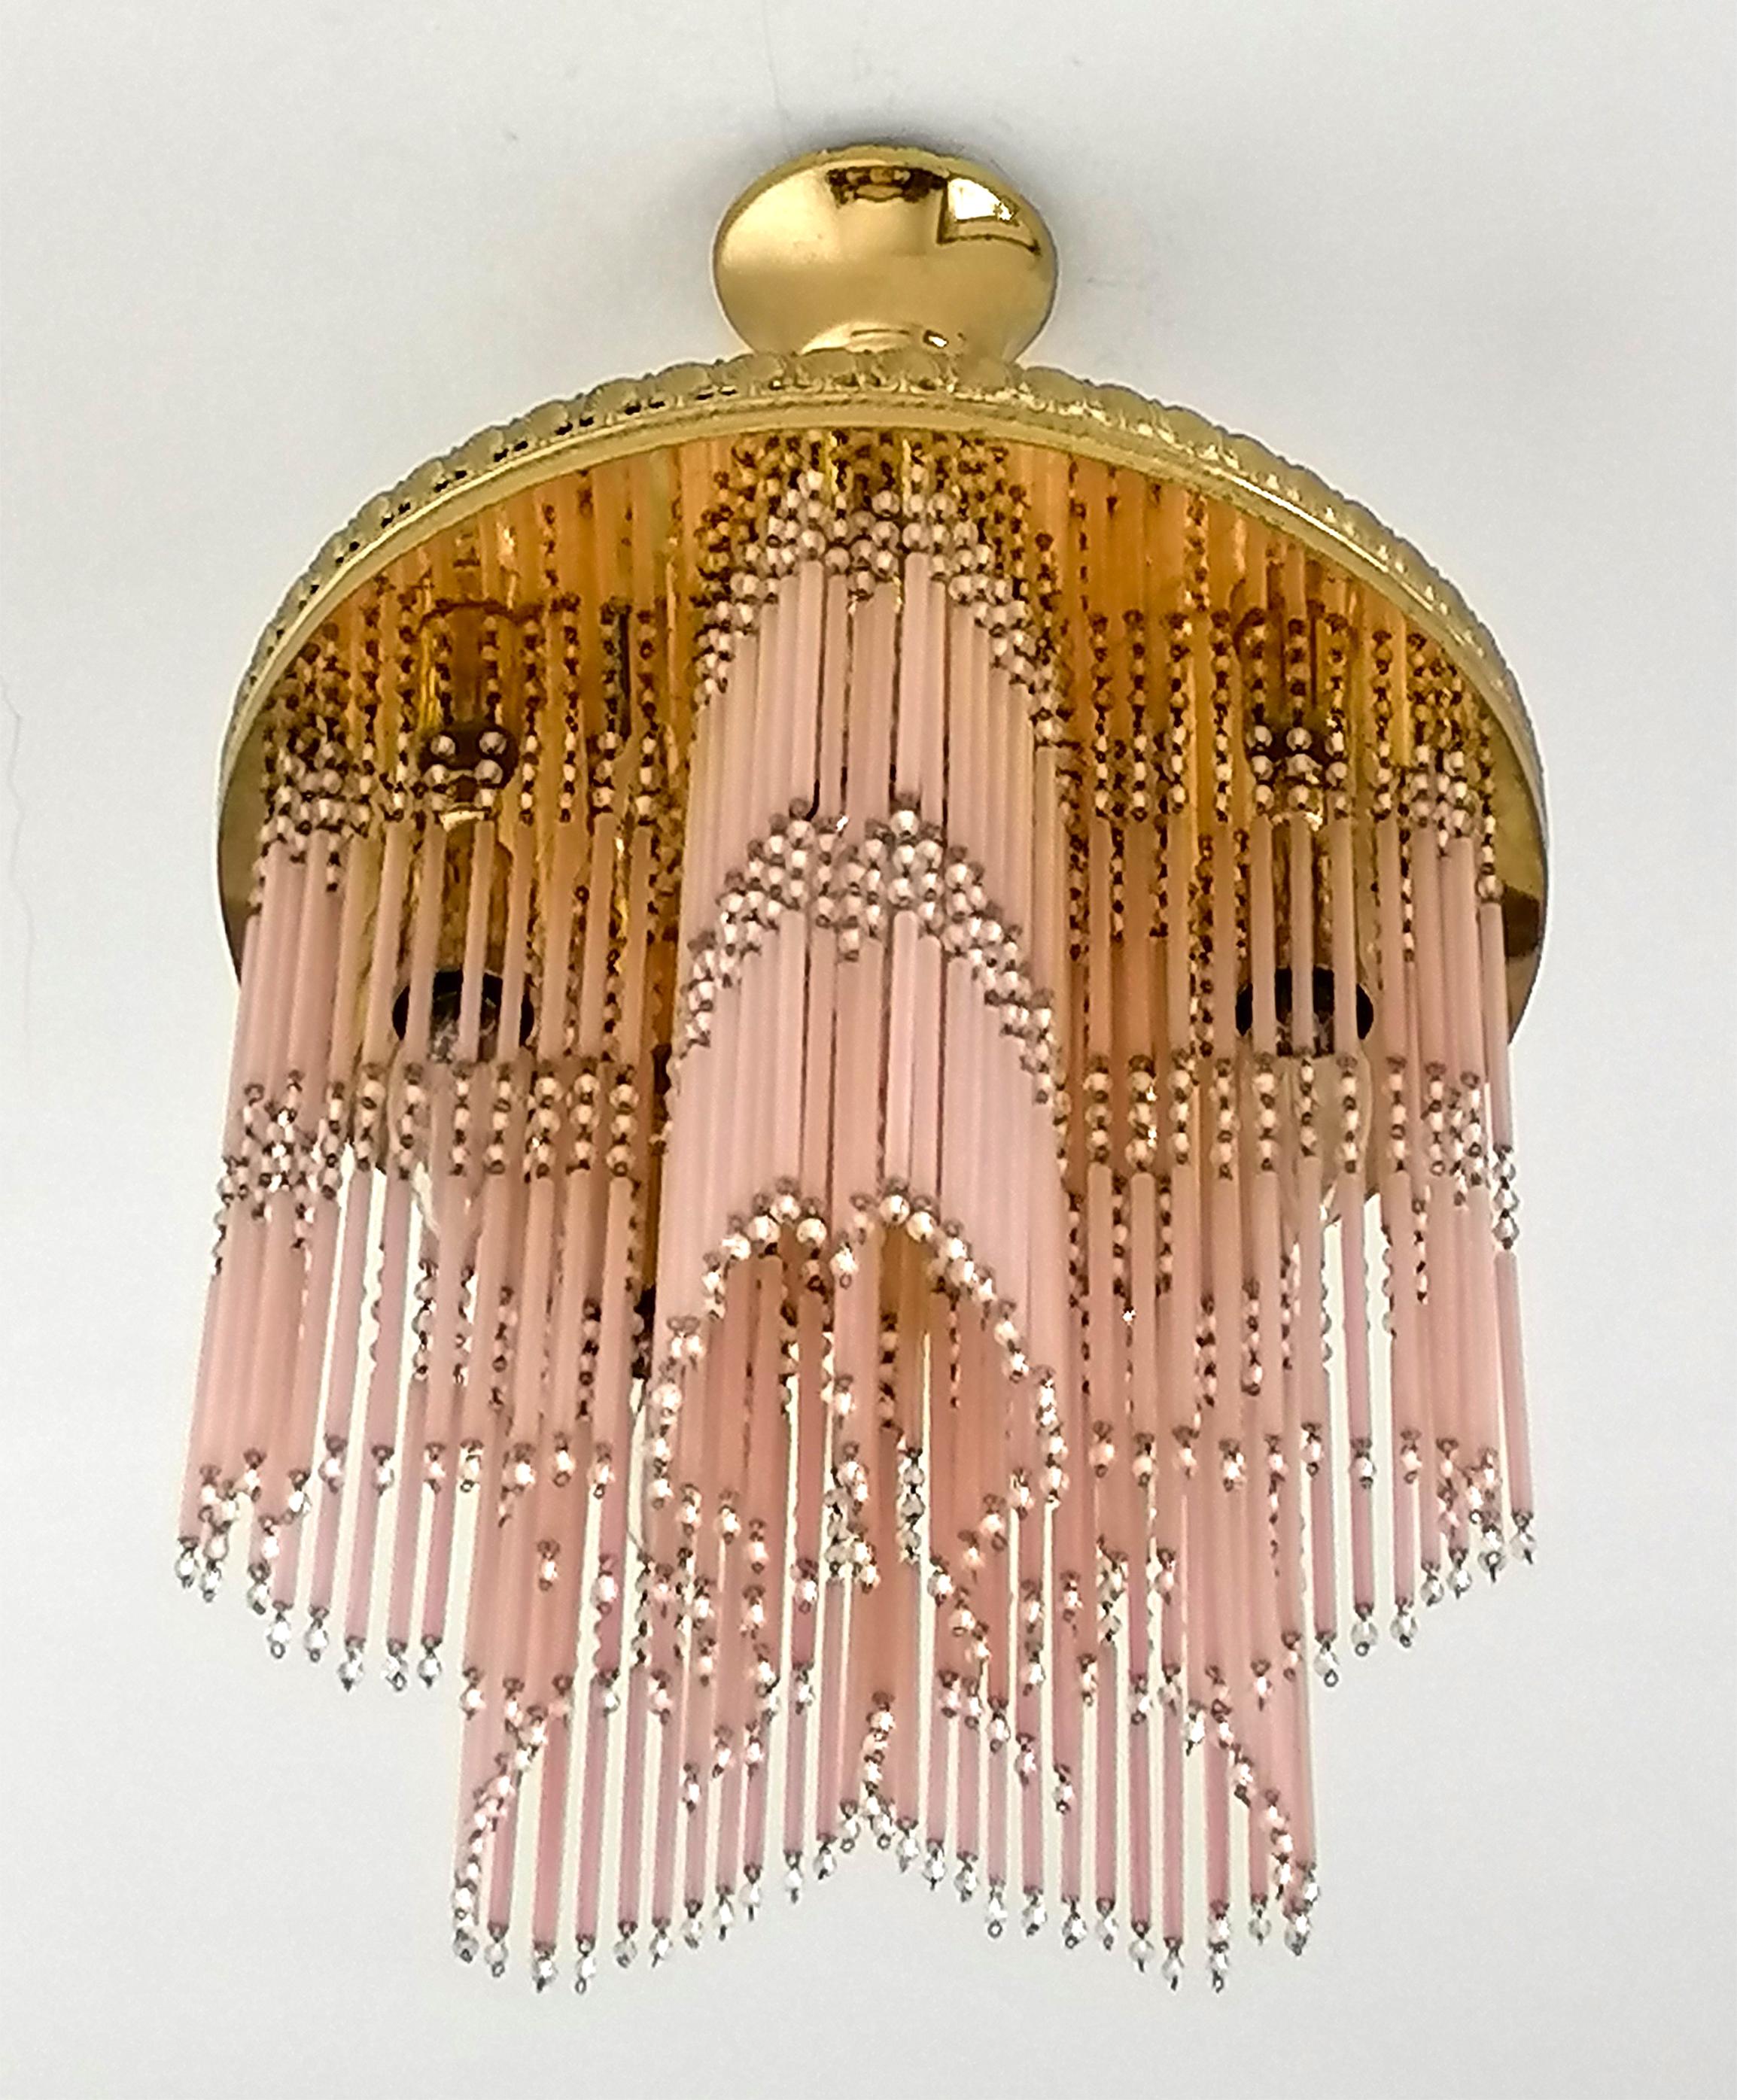 Fabulous Gilt Hollywood Regency Star-shaped Chandelier with Beaded Straw Fringes in Pink Murano Glass. From the Mid-20th Century. Gorgeous mirror effect. 
Dimensions:
Diameter: 15.35 in/ 39 cm
Height: 21 in / 53 cm 
Five light bulbs E14/ good